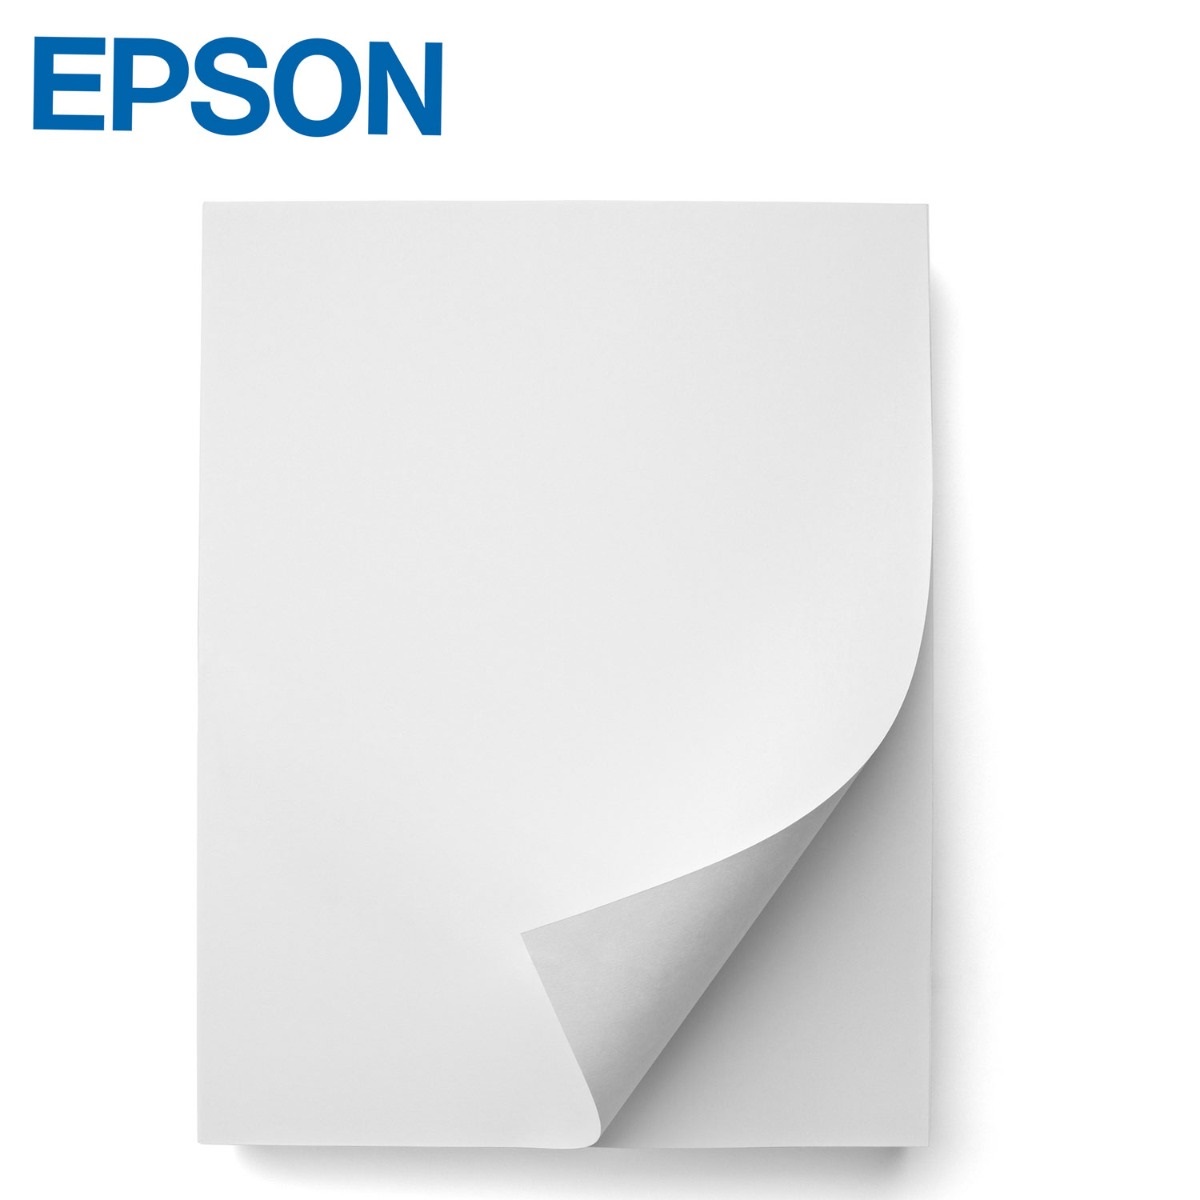 Epson Poster Paper Production